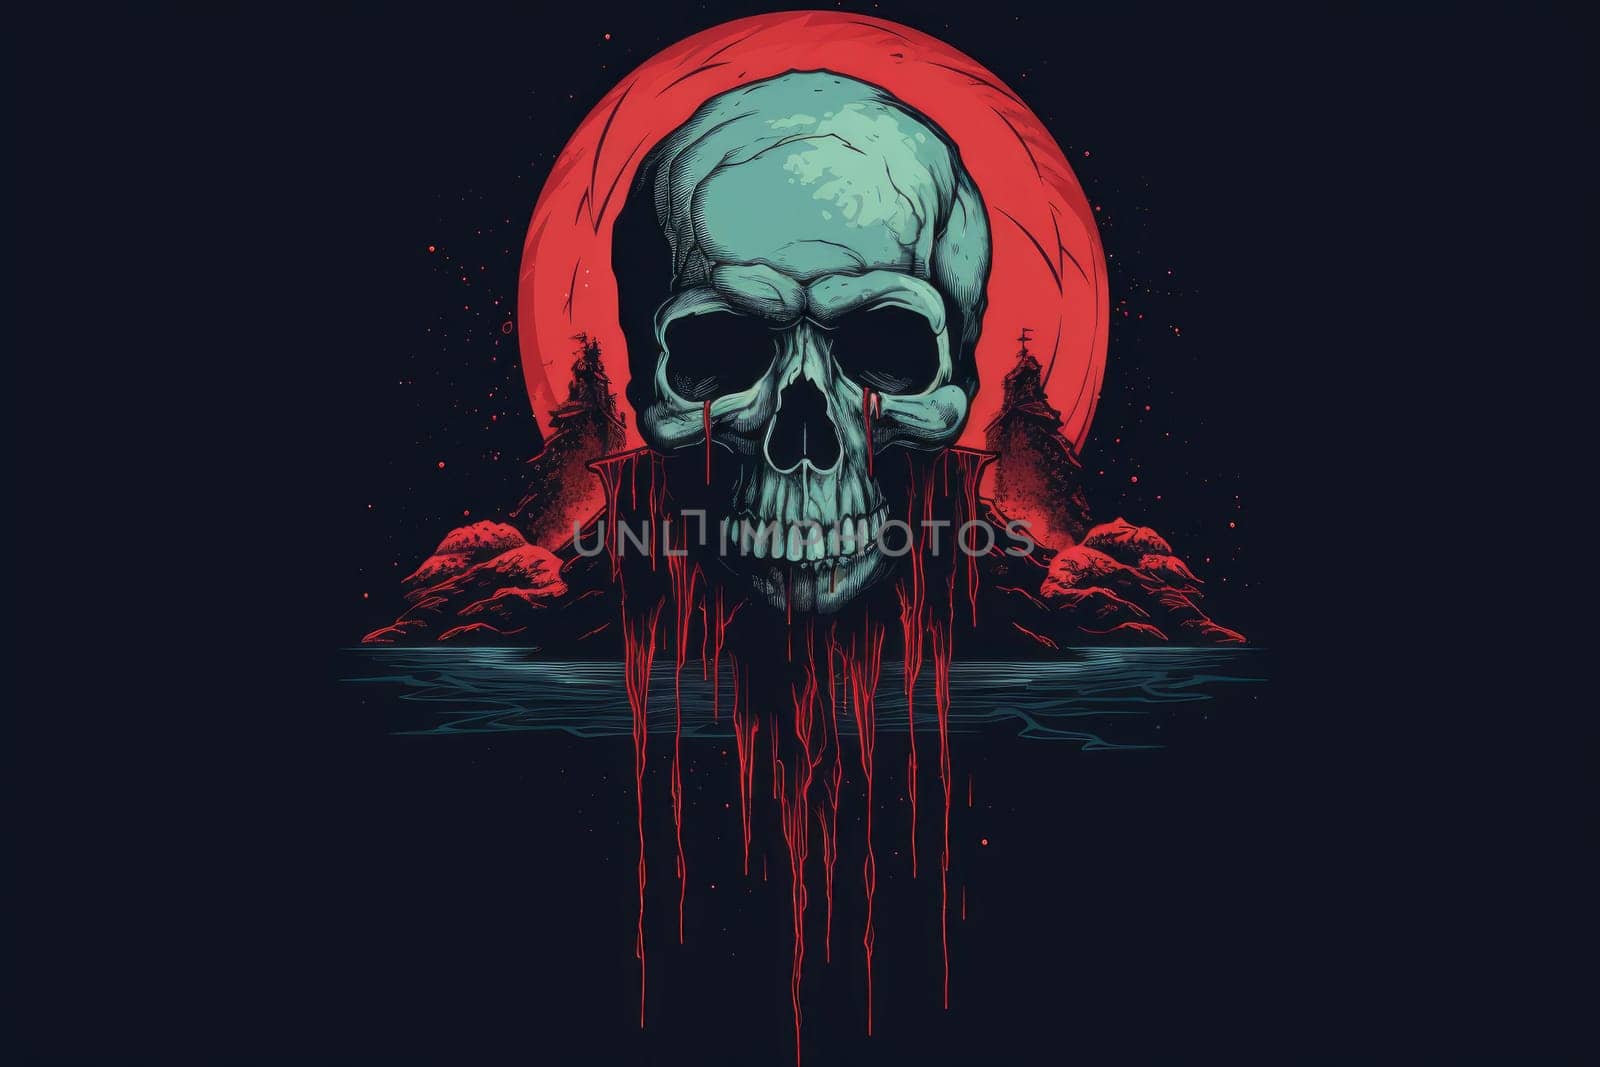 Chilling Dead day with skull. Dead music culture by ylivdesign